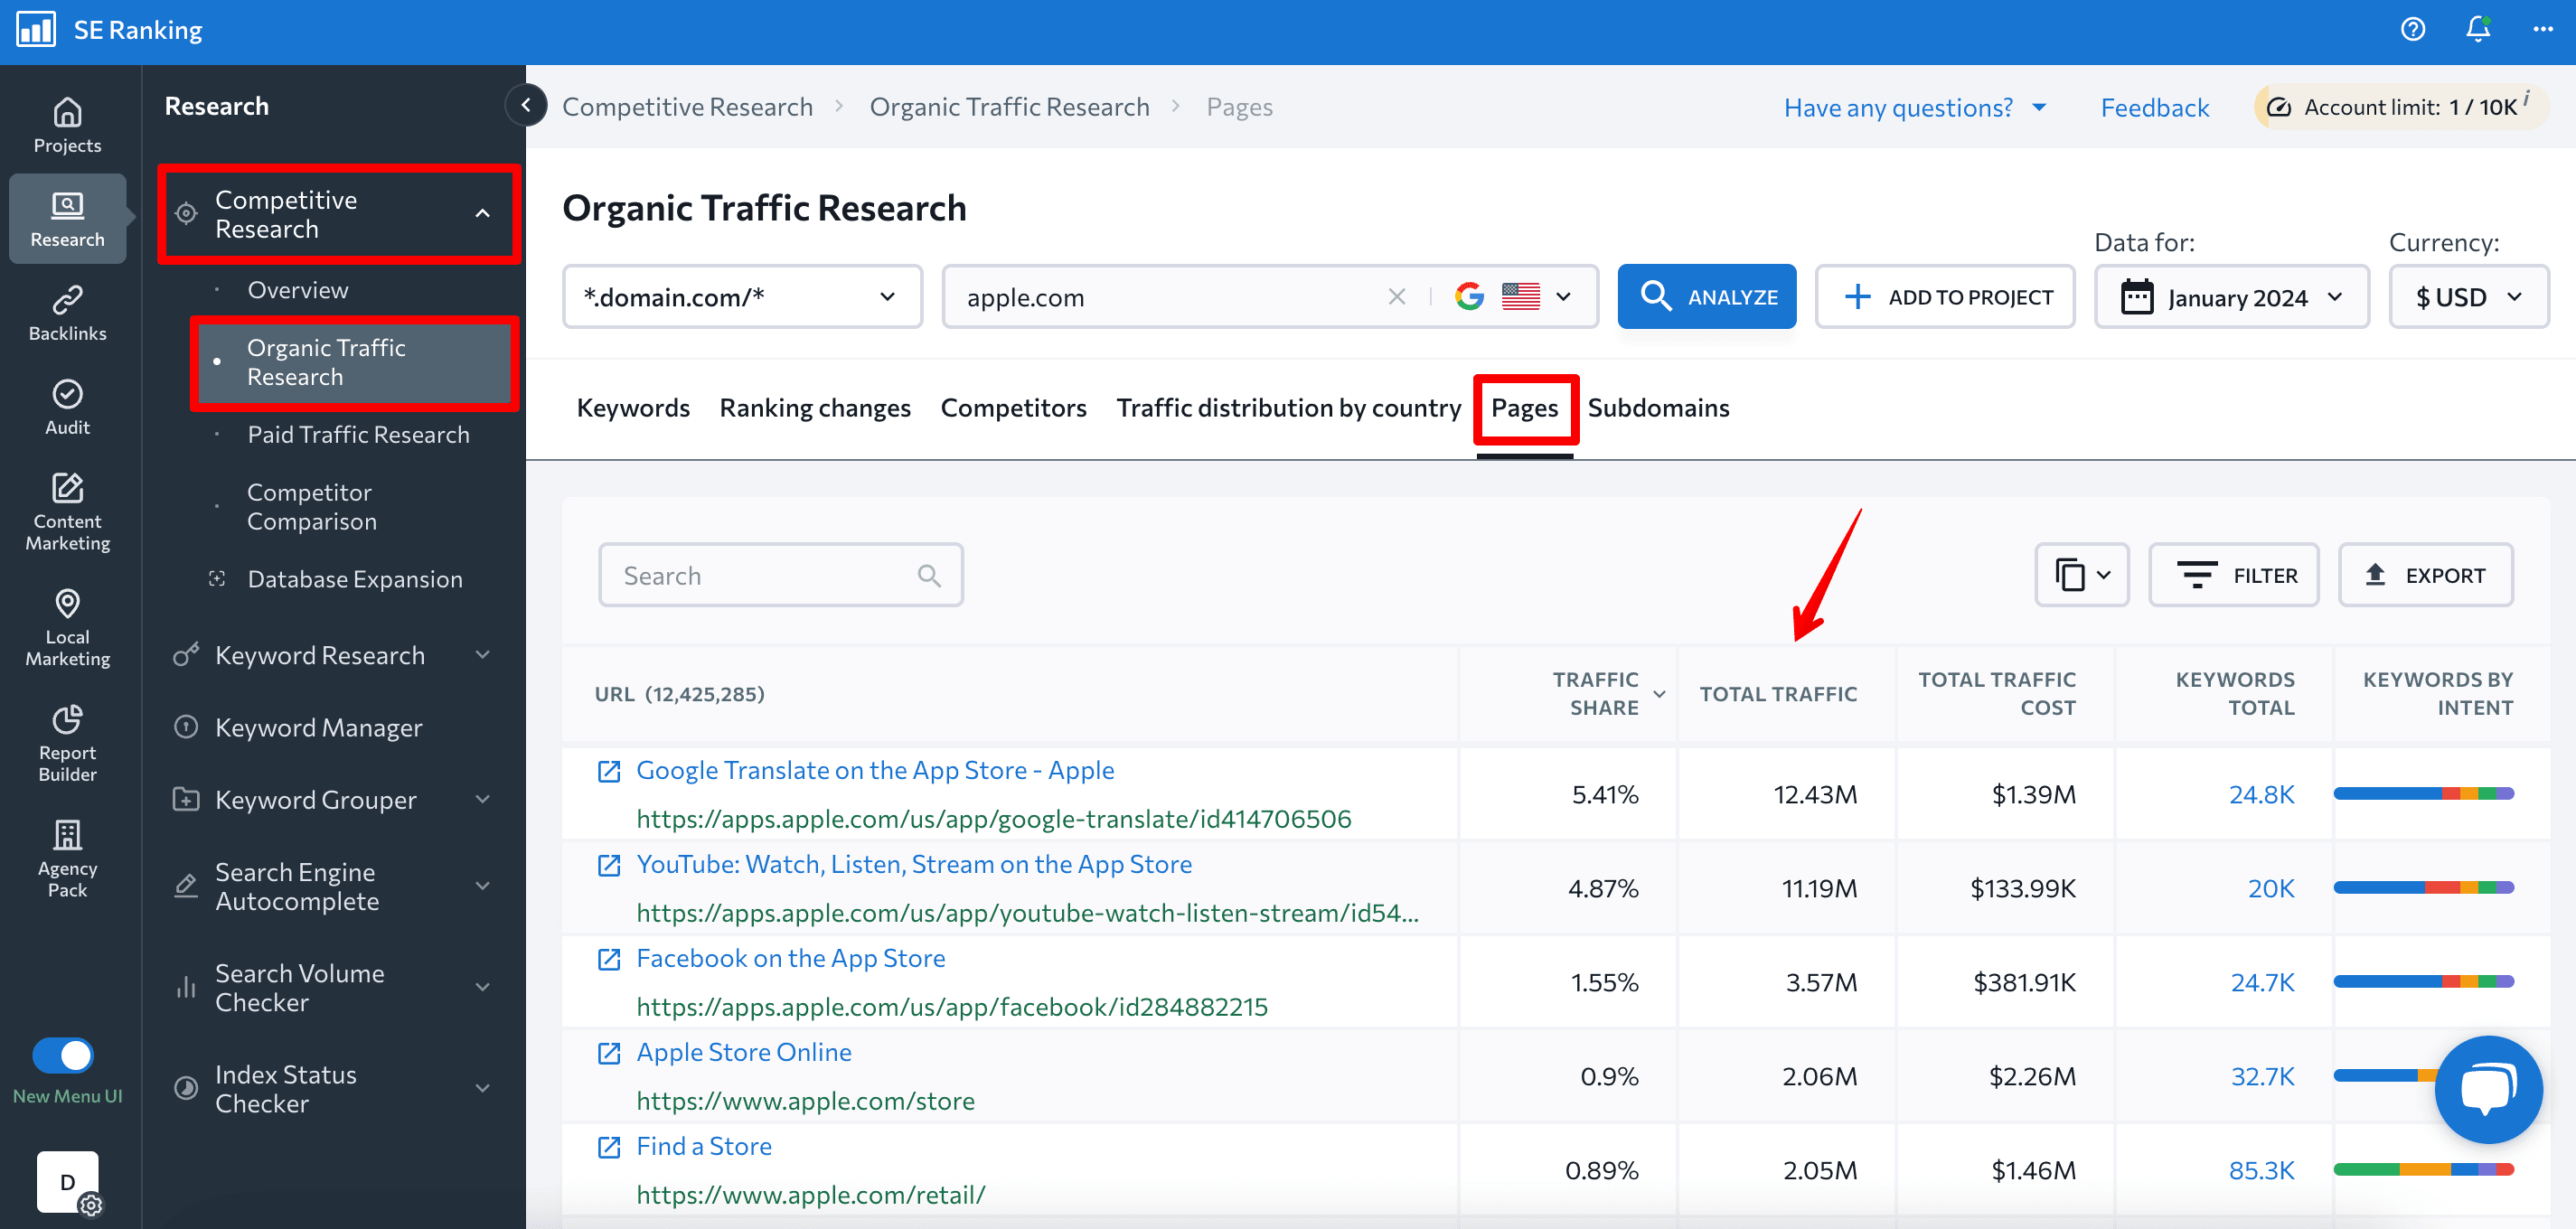 How to identify your top pages by their traffic with SE Ranking